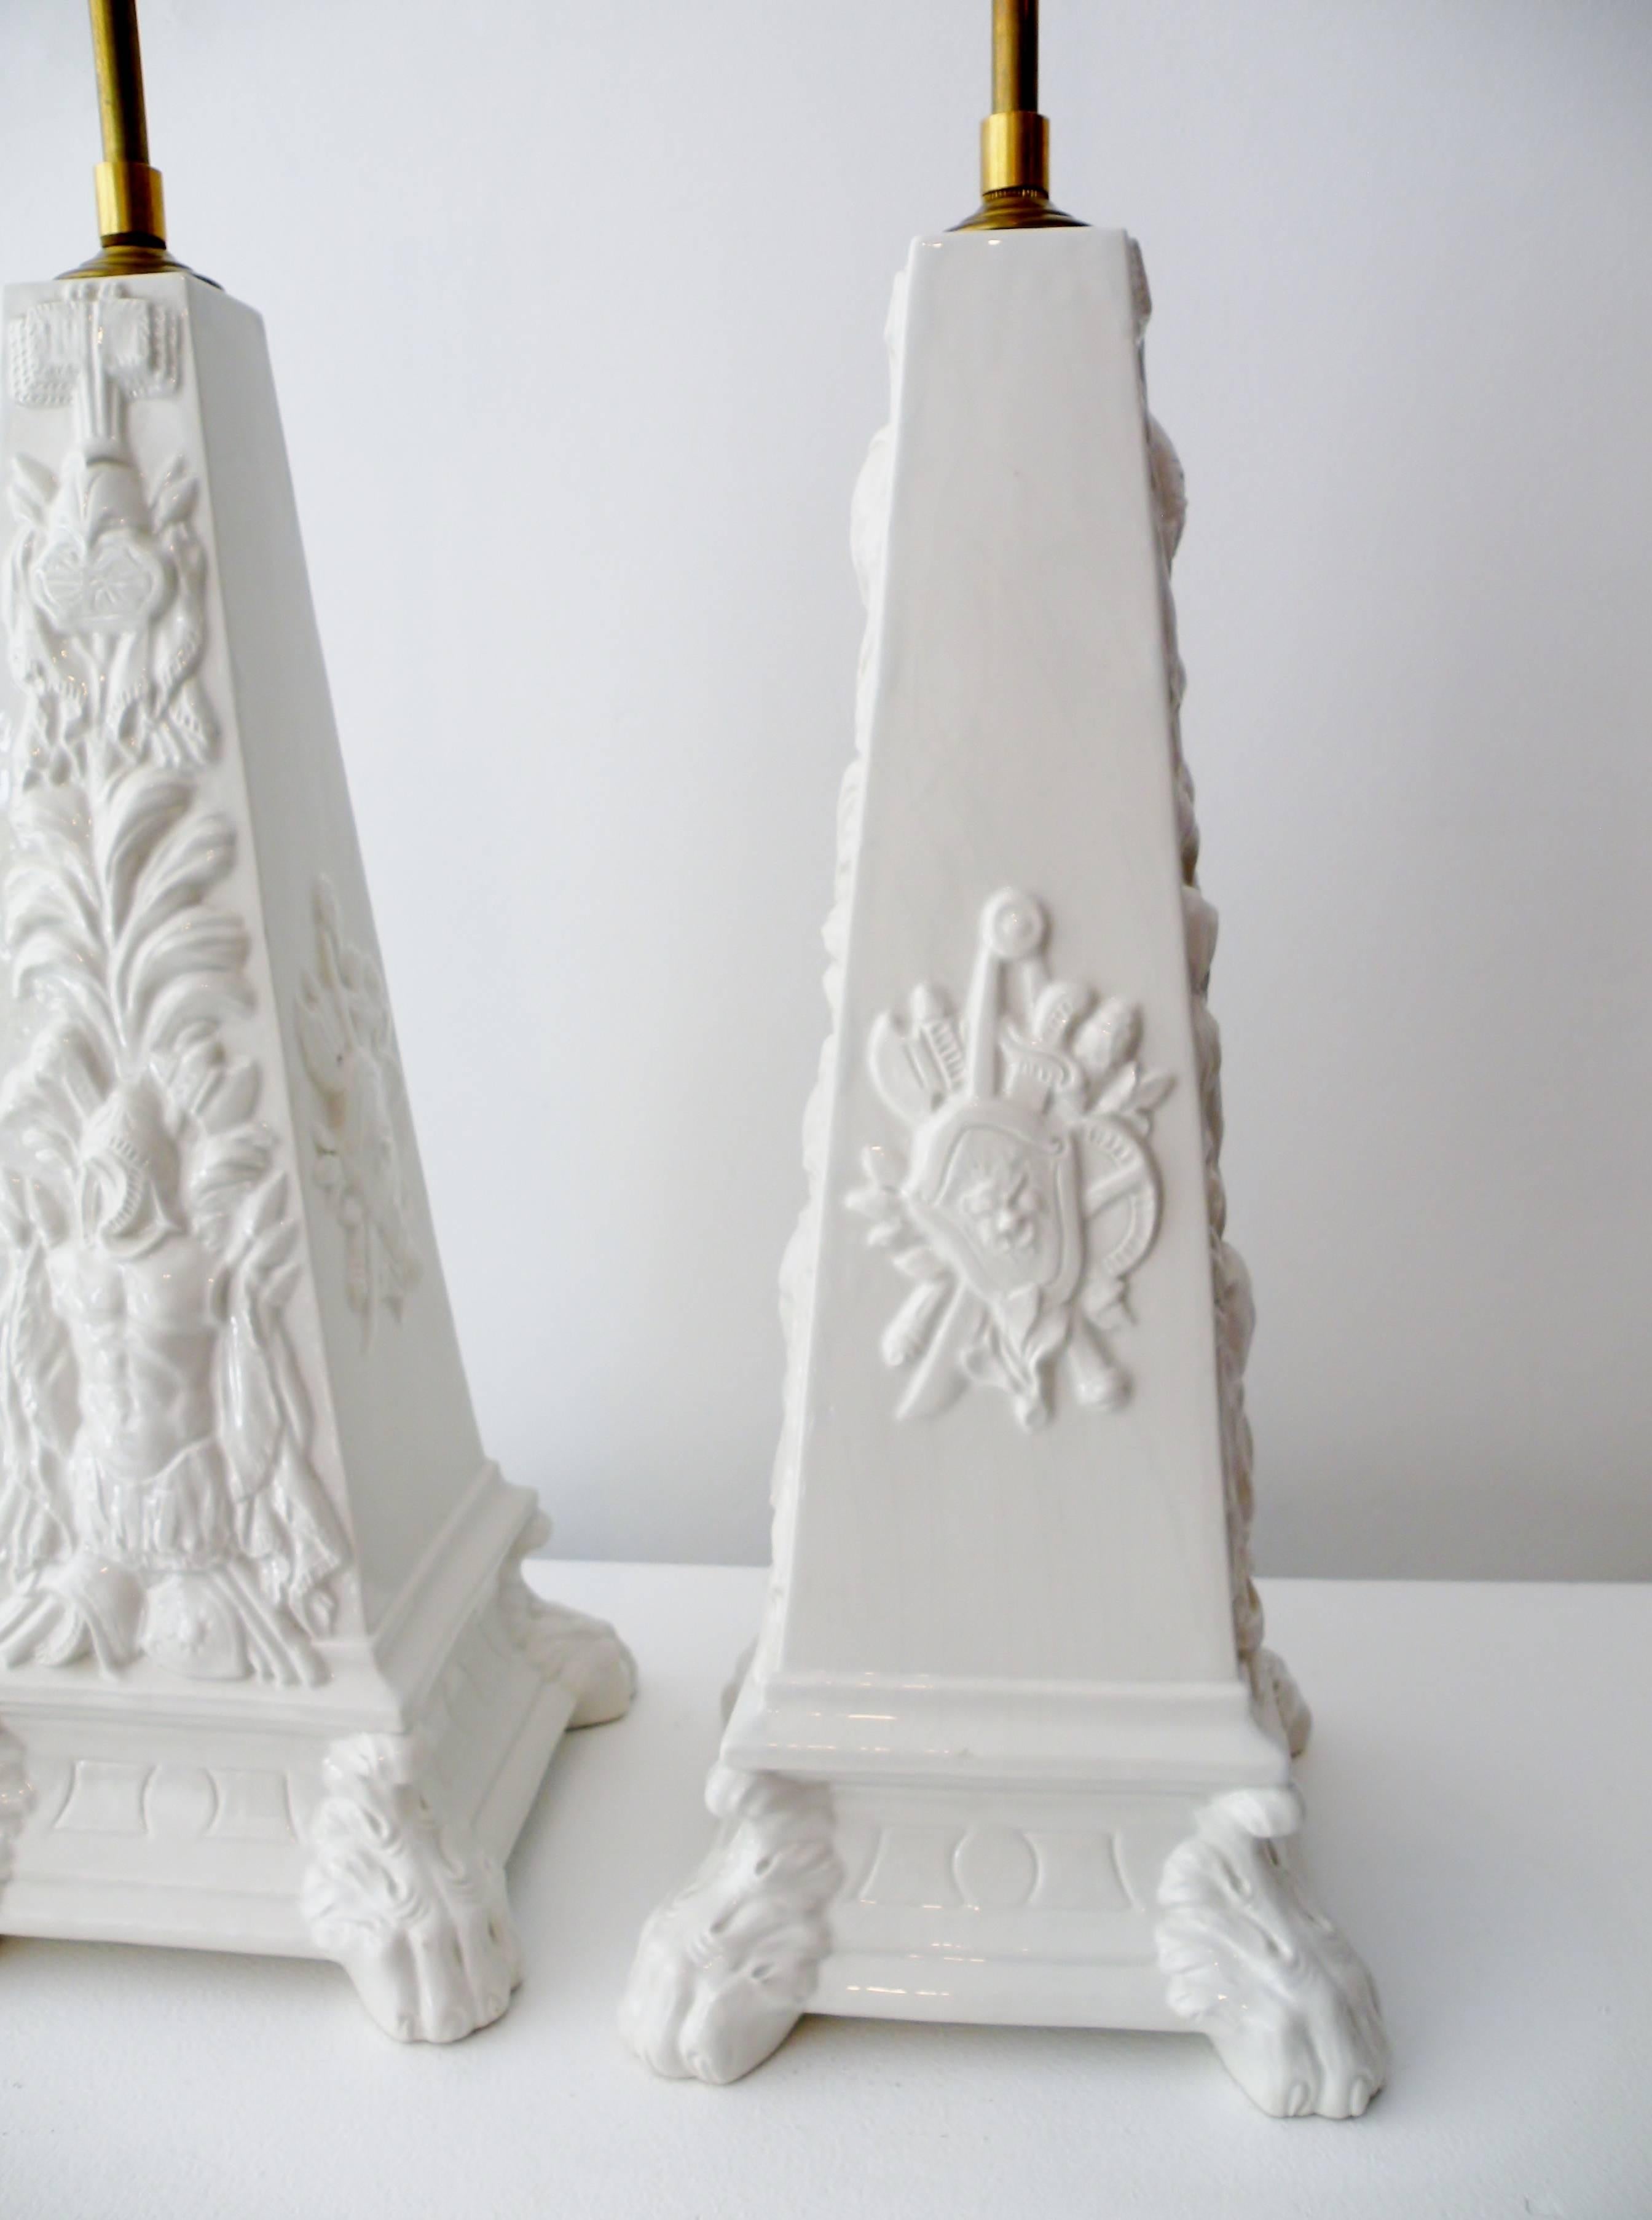 Late 20th Century Mottahedeh Blanc de Chine Classical Obelisk Pair Table Lamps Italian Ceramic For Sale